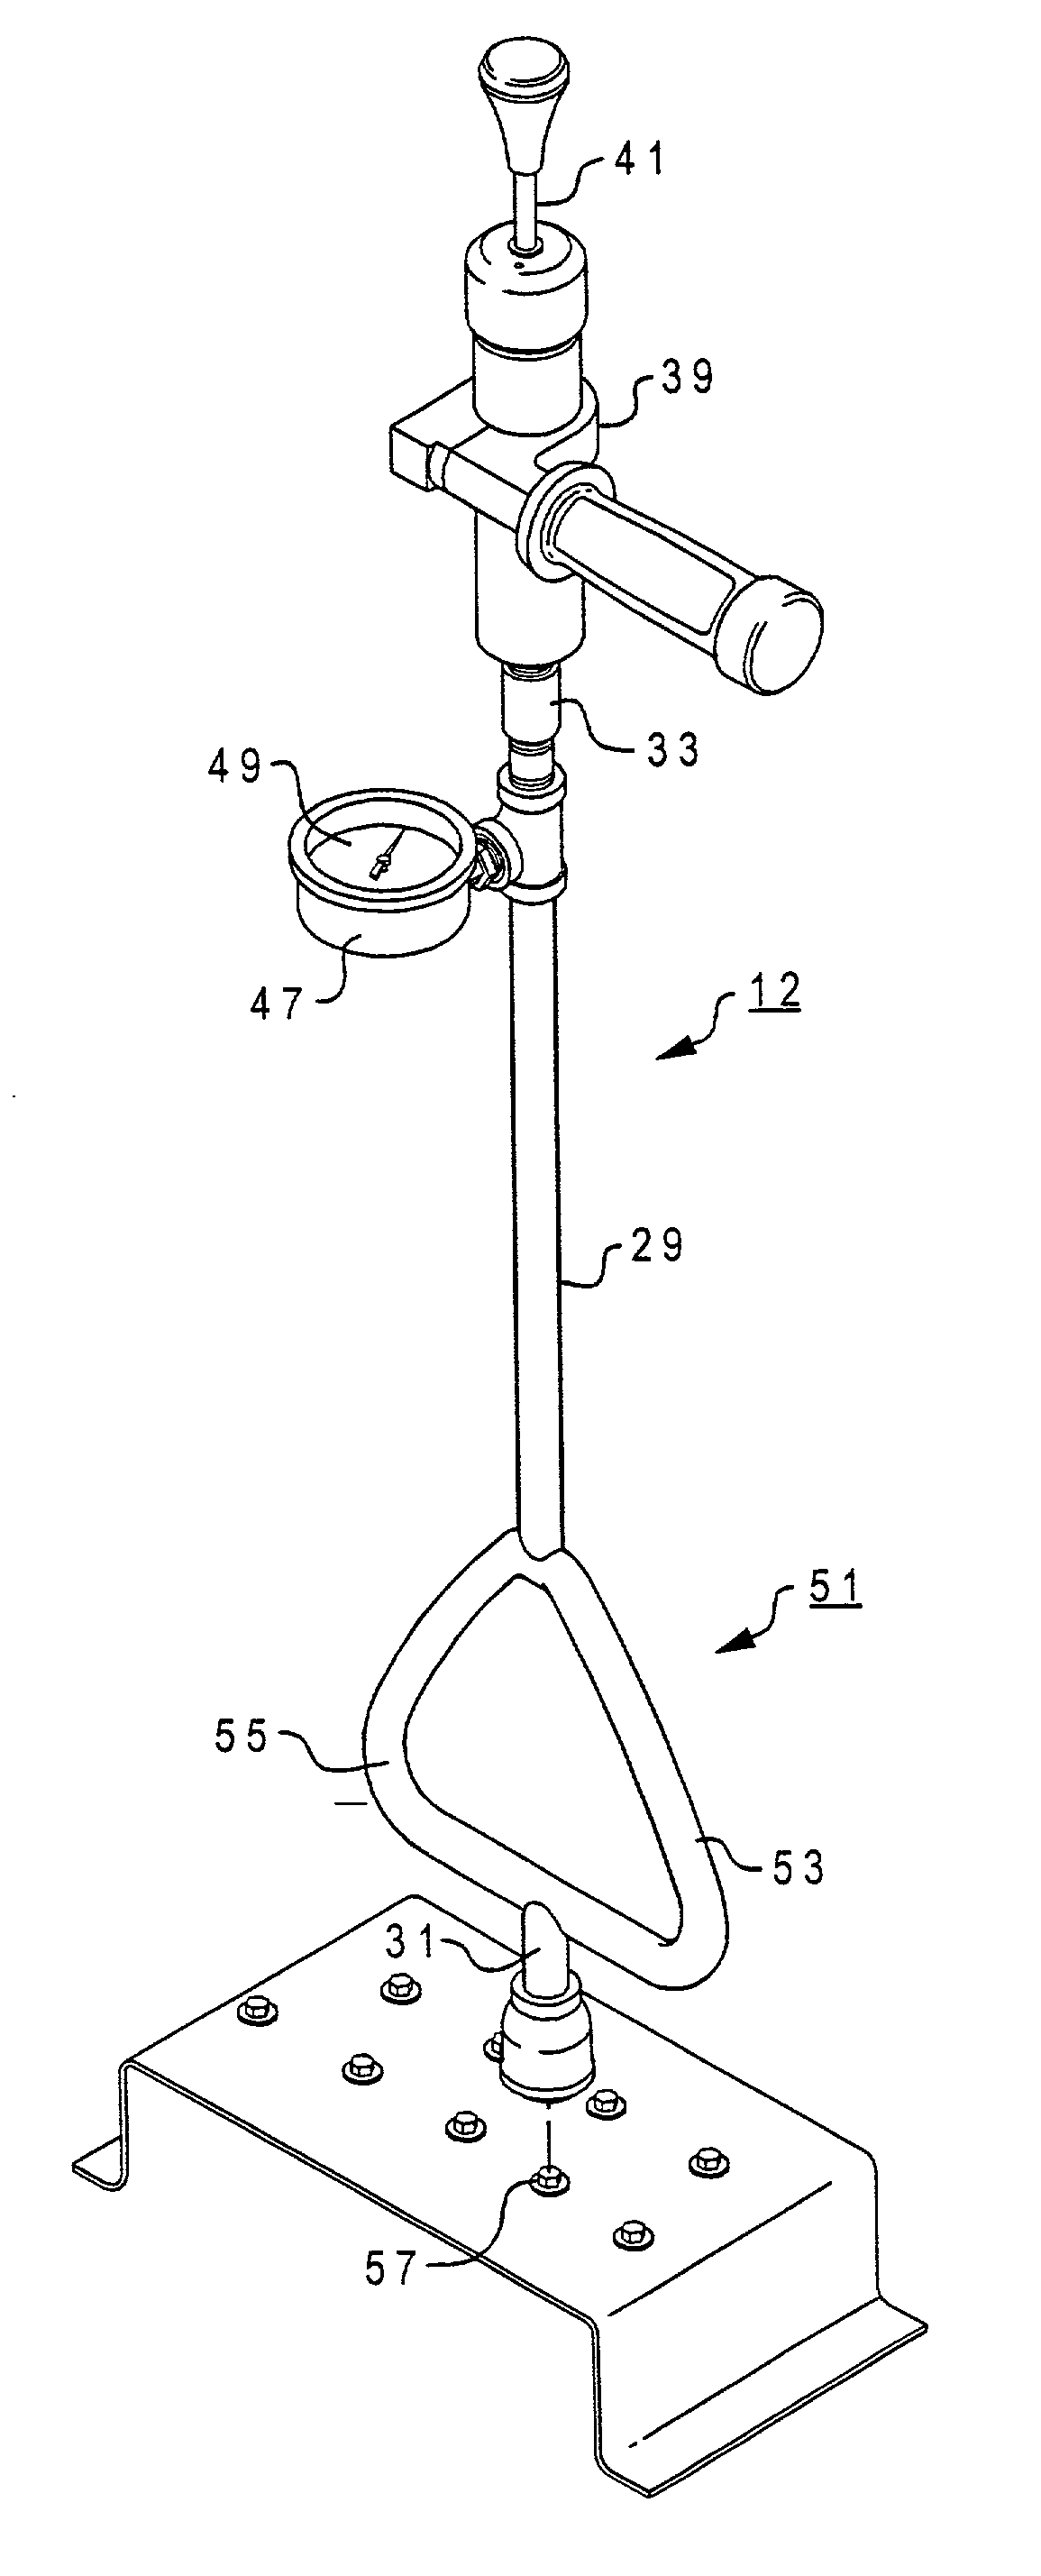 Apparatus and method for detecting leaks in metal roofs